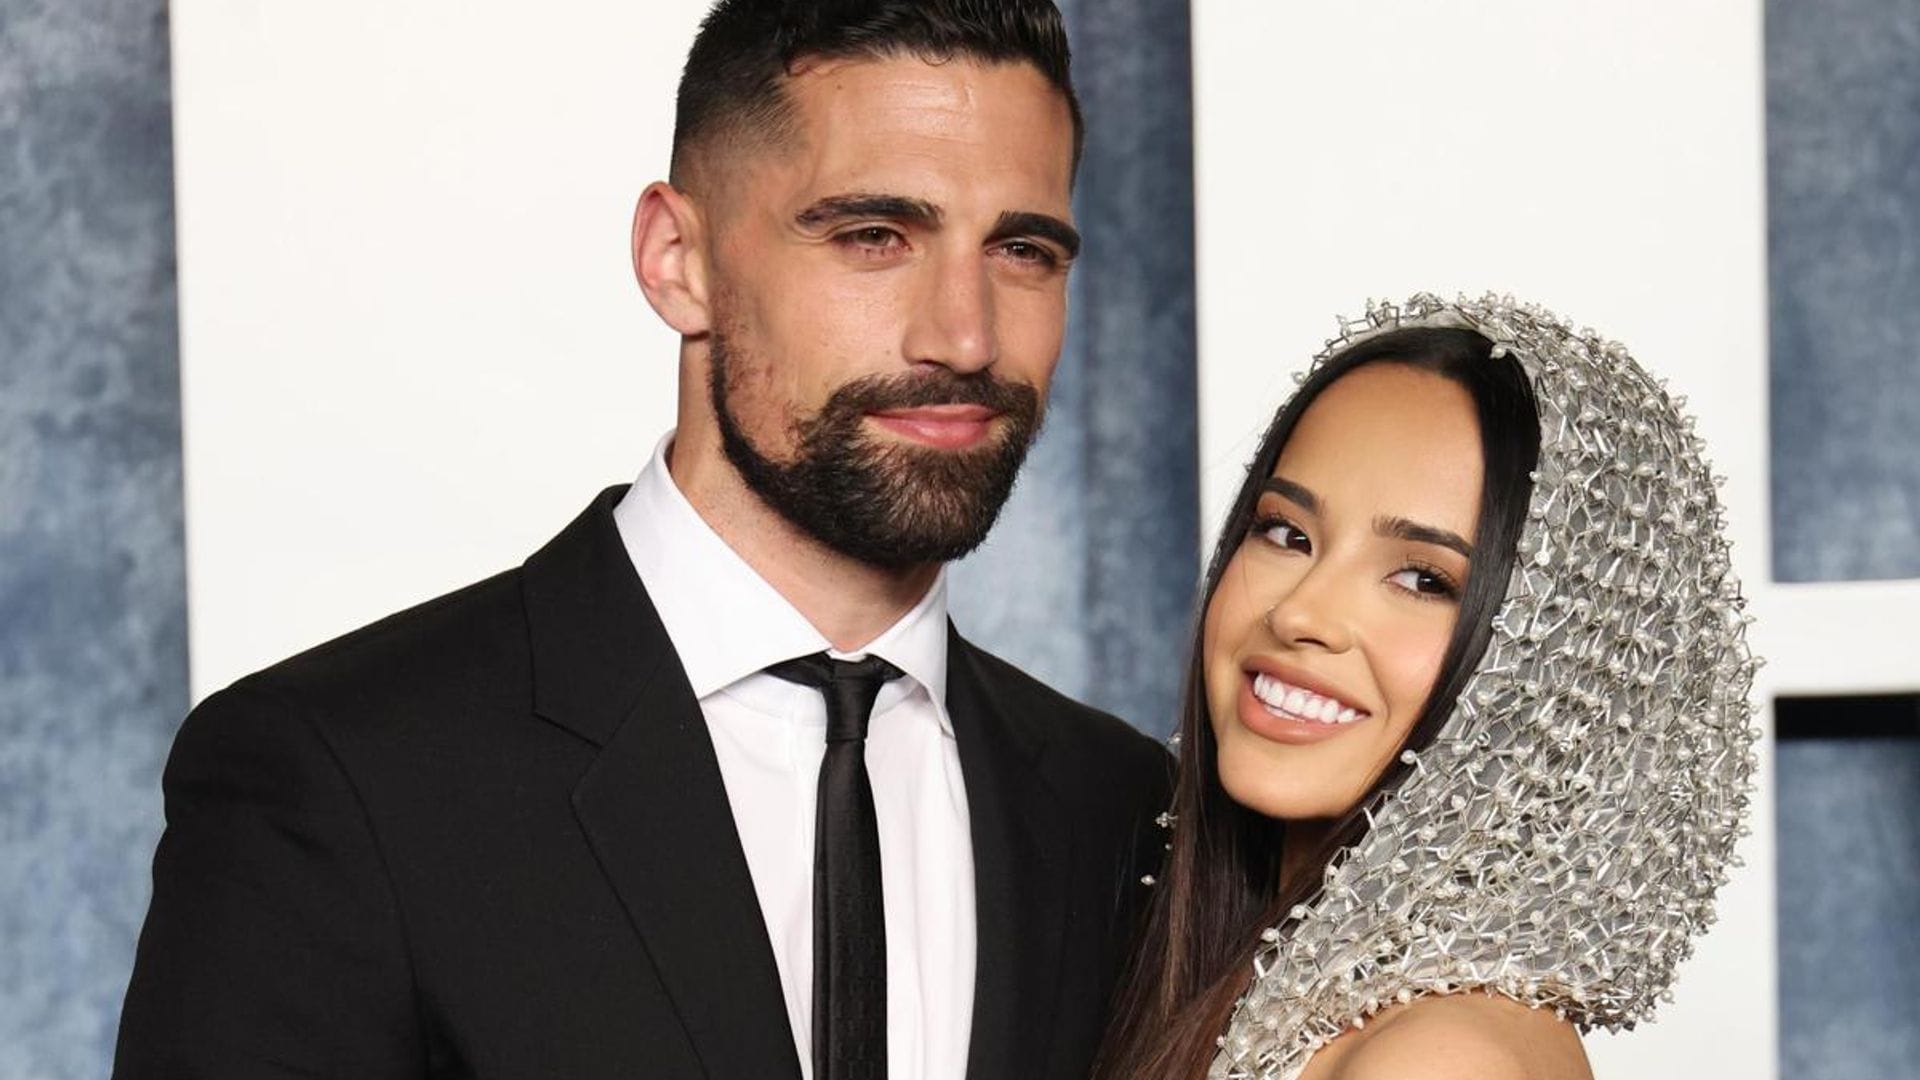 Becky G and Sebastian Lleget reunite for the first time since his cheating accusations